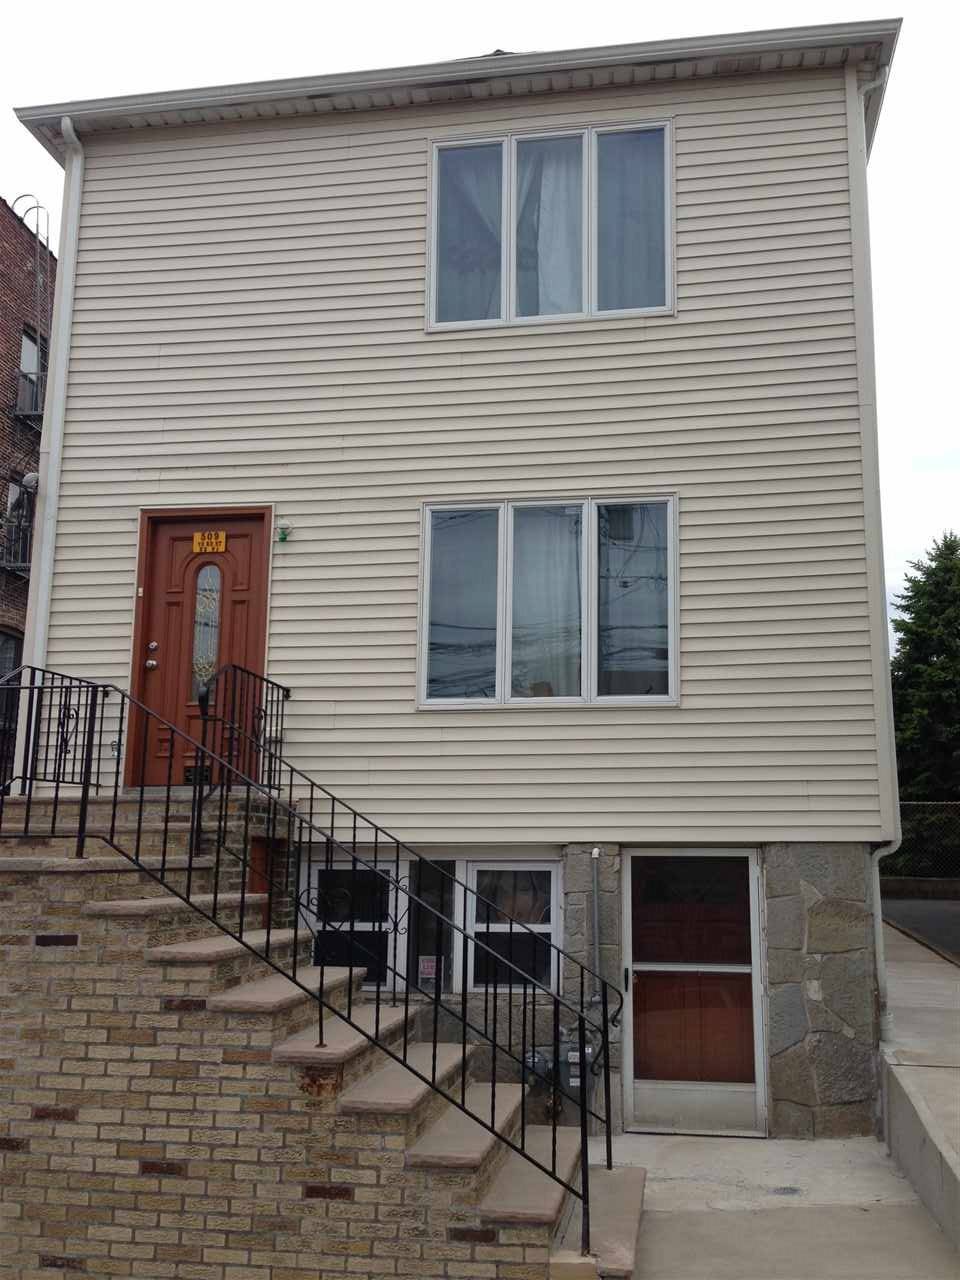 Beautiful well maintained spacious 1 Fam home conveniently located steps from Bergenline Ave